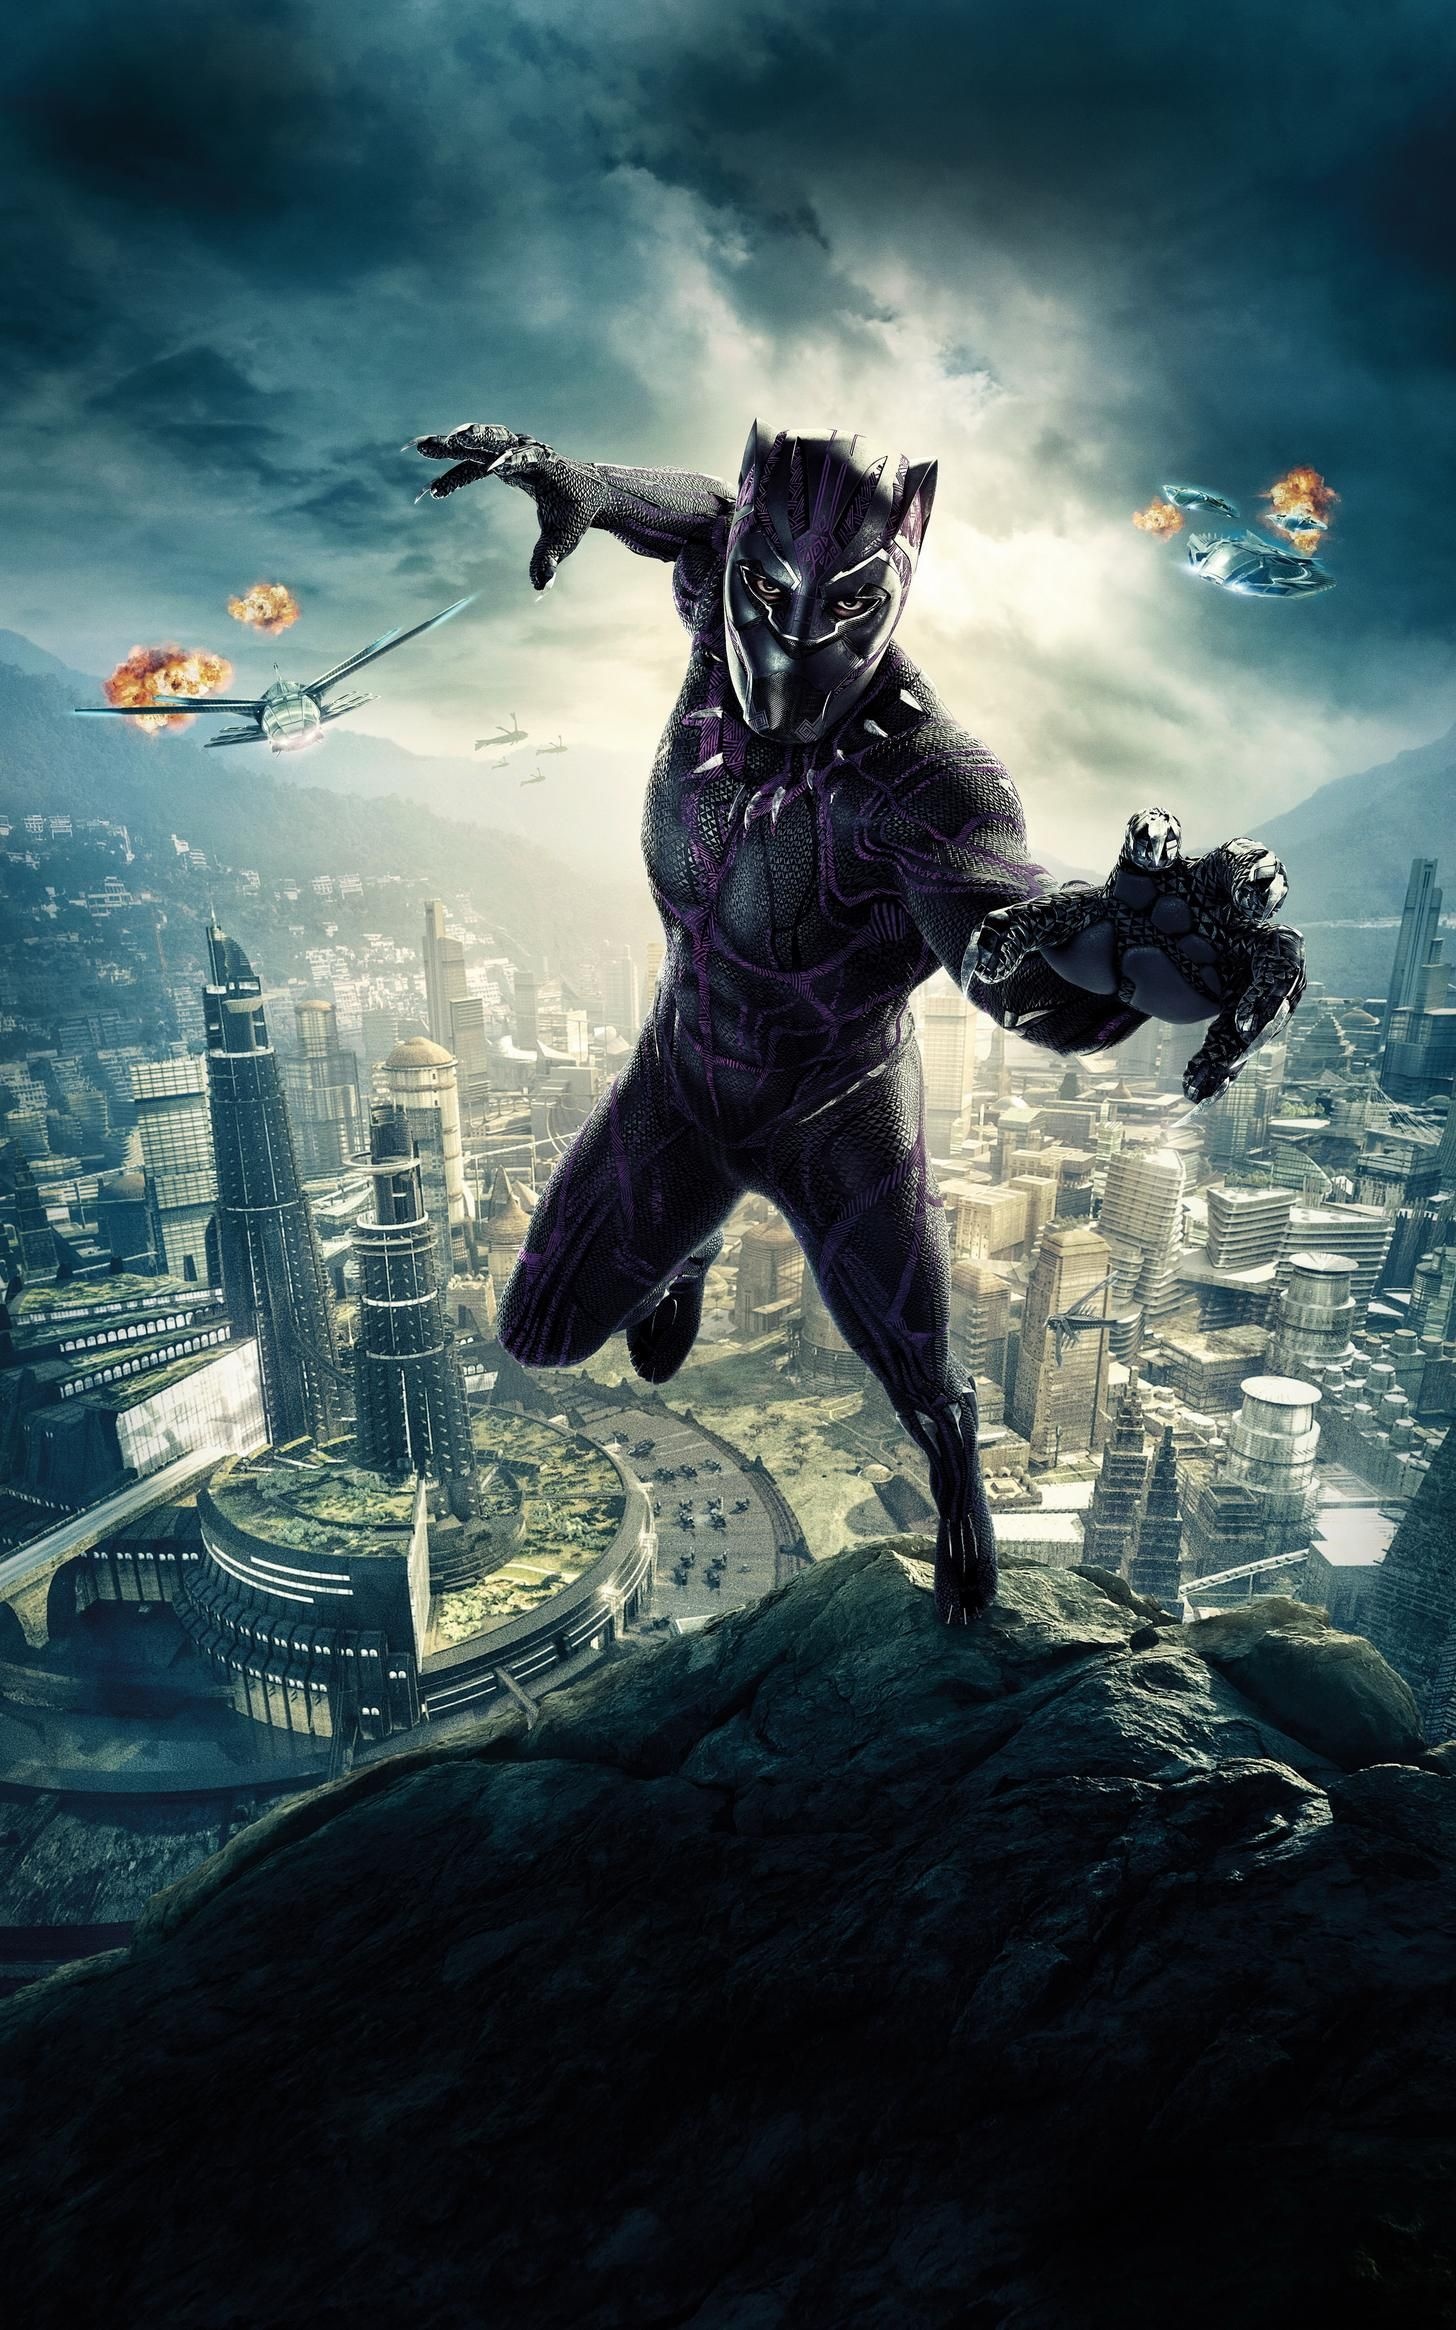 Movie poster wallpapers, Epic black panther, Cinematic masterpiece, Marvel's hero, 1460x2330 HD Phone